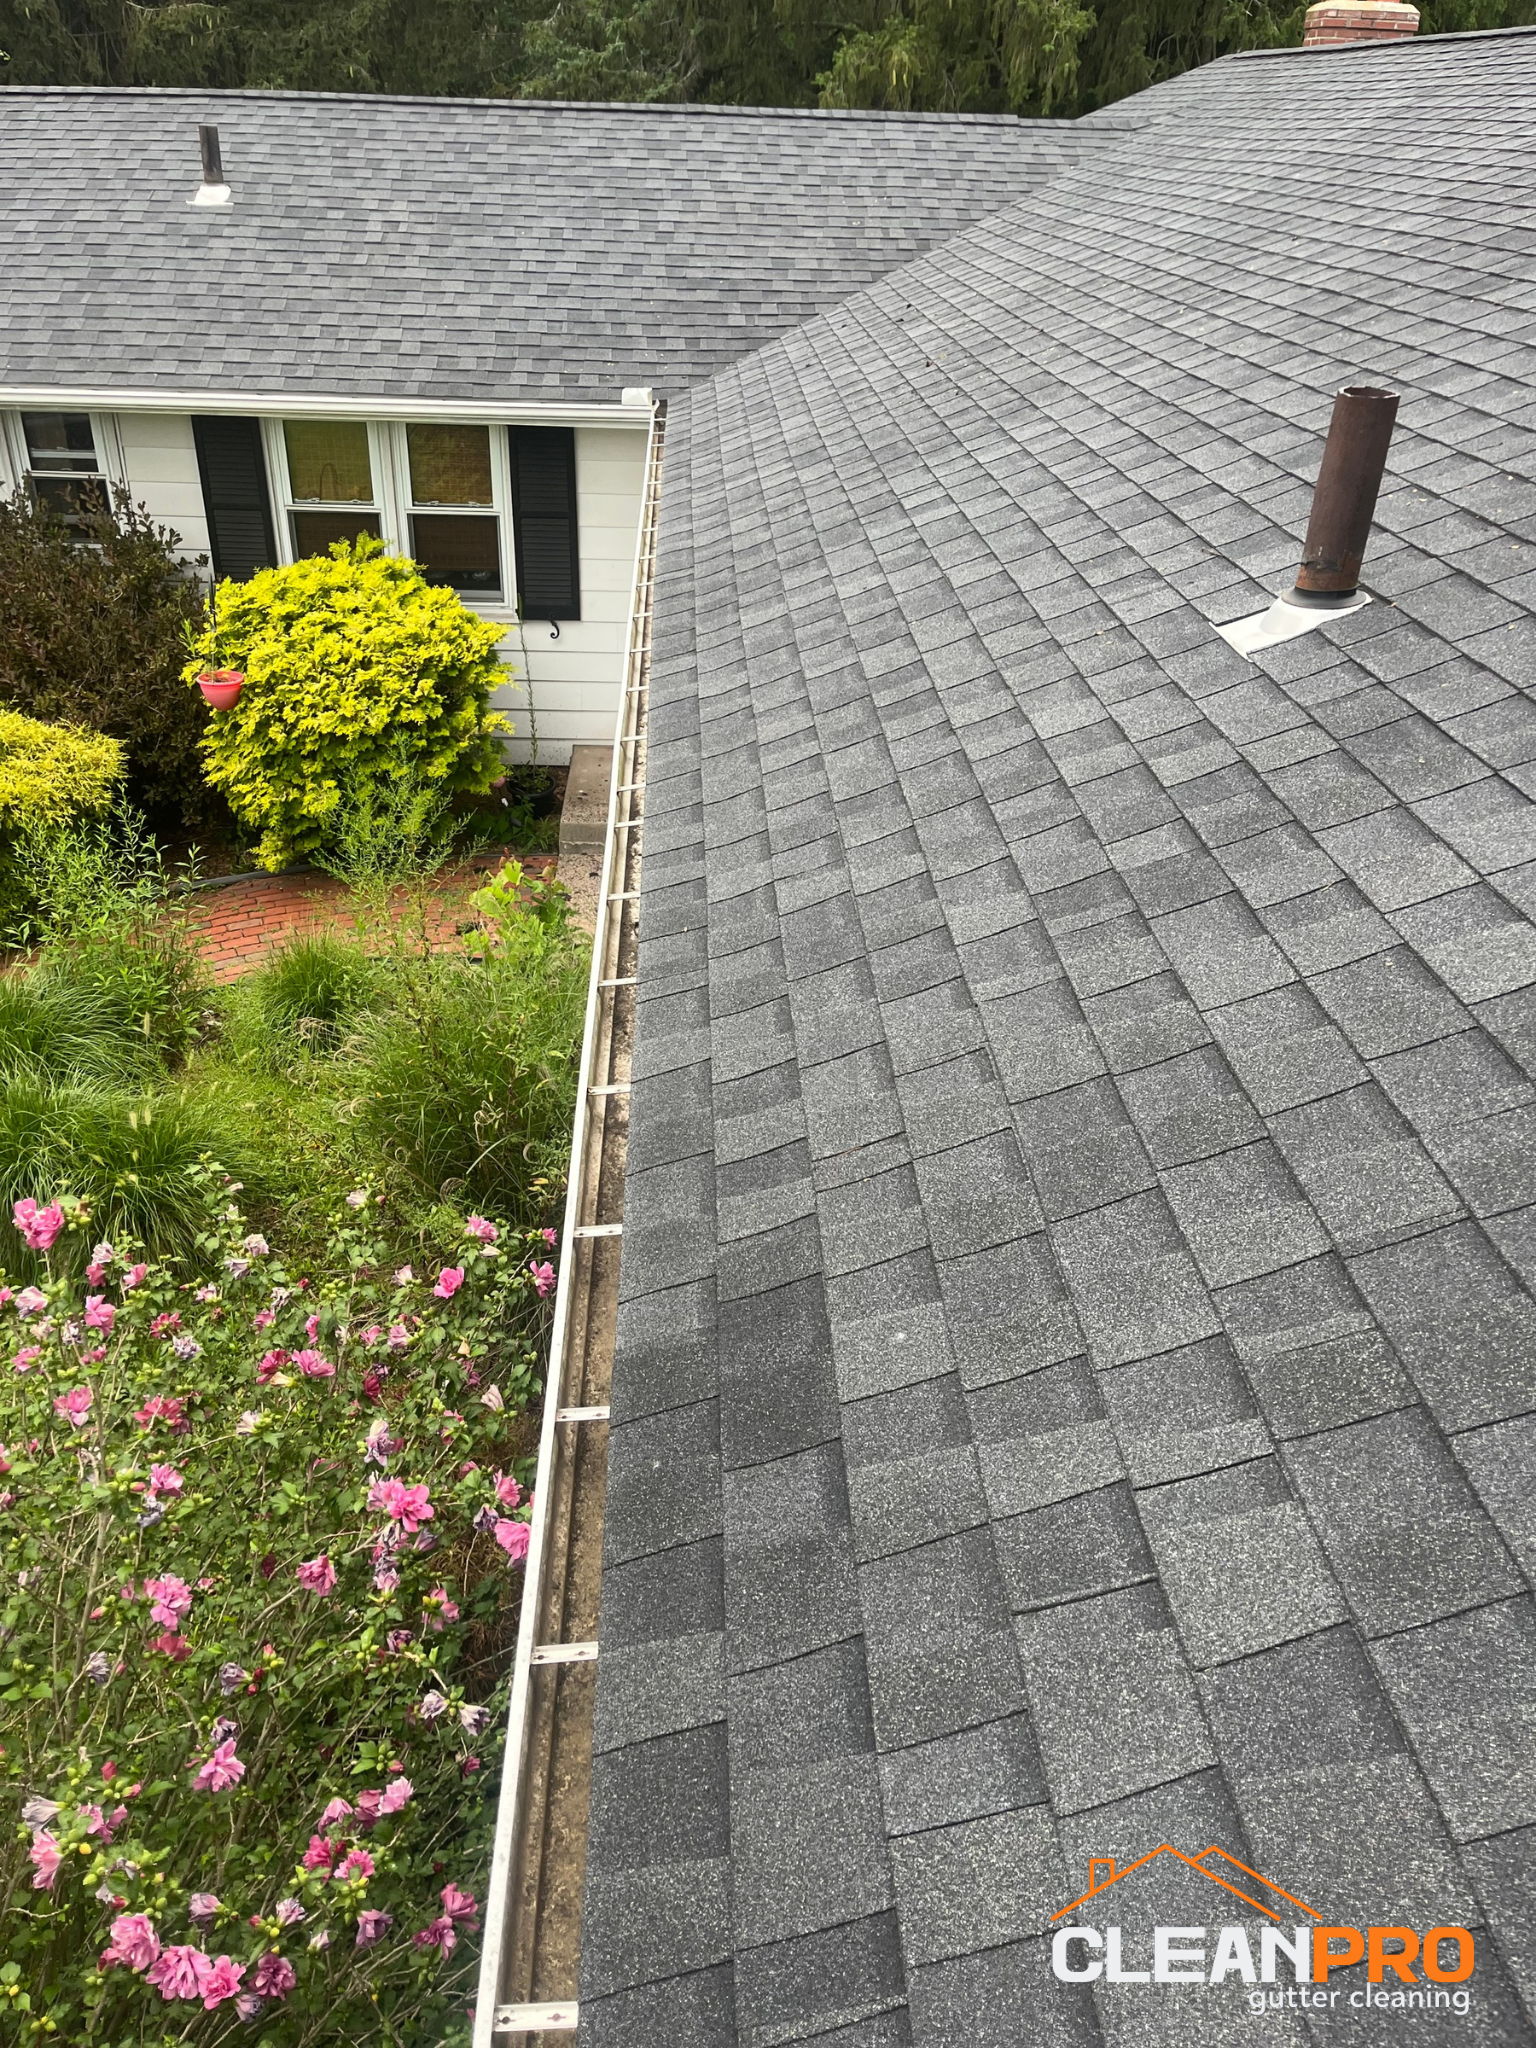 Best Gutter Cleaning Service in Chicago